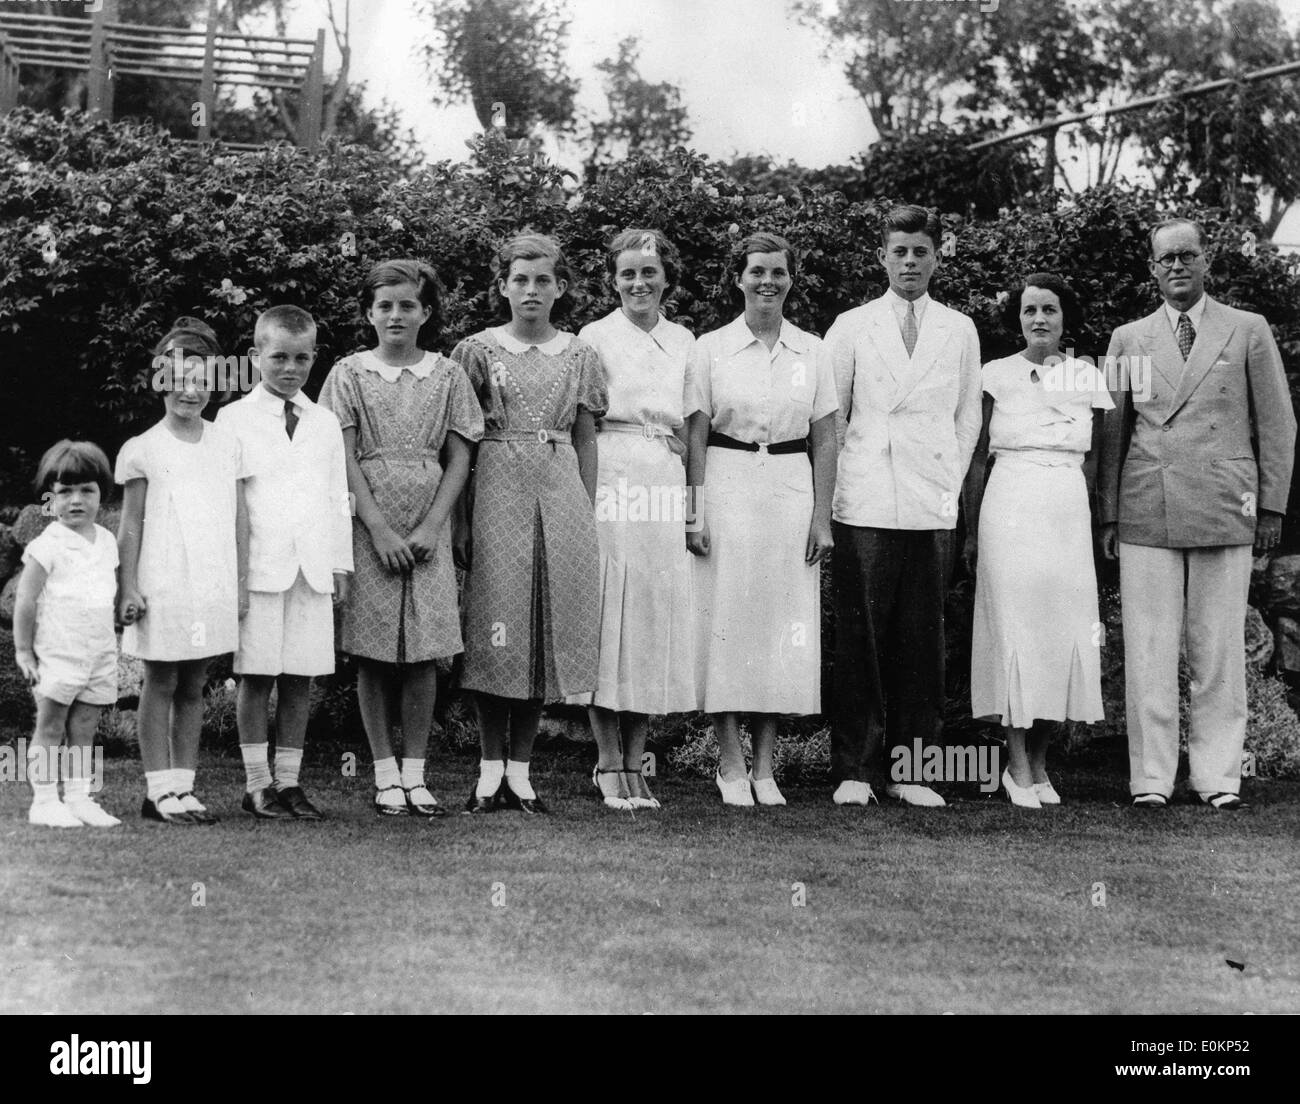 July 07, 1934 - Boston, Massachusetts, U.S. - L to R: EDWARD KENNEDY, JEANNE KENNEDY, ROBERT KENNEDY, PATRICIA KENNEDY, EUNICE KENNEDY, KATHLEEN KENNEDY, ROSEMARY KENNEDY, JOHN KENNEDY, Mrs. ROSE KENNEDY and JOSEPH P. KENNEDY. The Kennedy family is a prominent Irish-American family in American politics and government descending from the marriage of JOSEPH P. KENNEDY and ROSE FITZGERALD KENNEDY. The predominantly Democratic family is known for its US-style political liberalism. The best known Kennedy is the late President of the United States John F. Kennedy Stock Photo